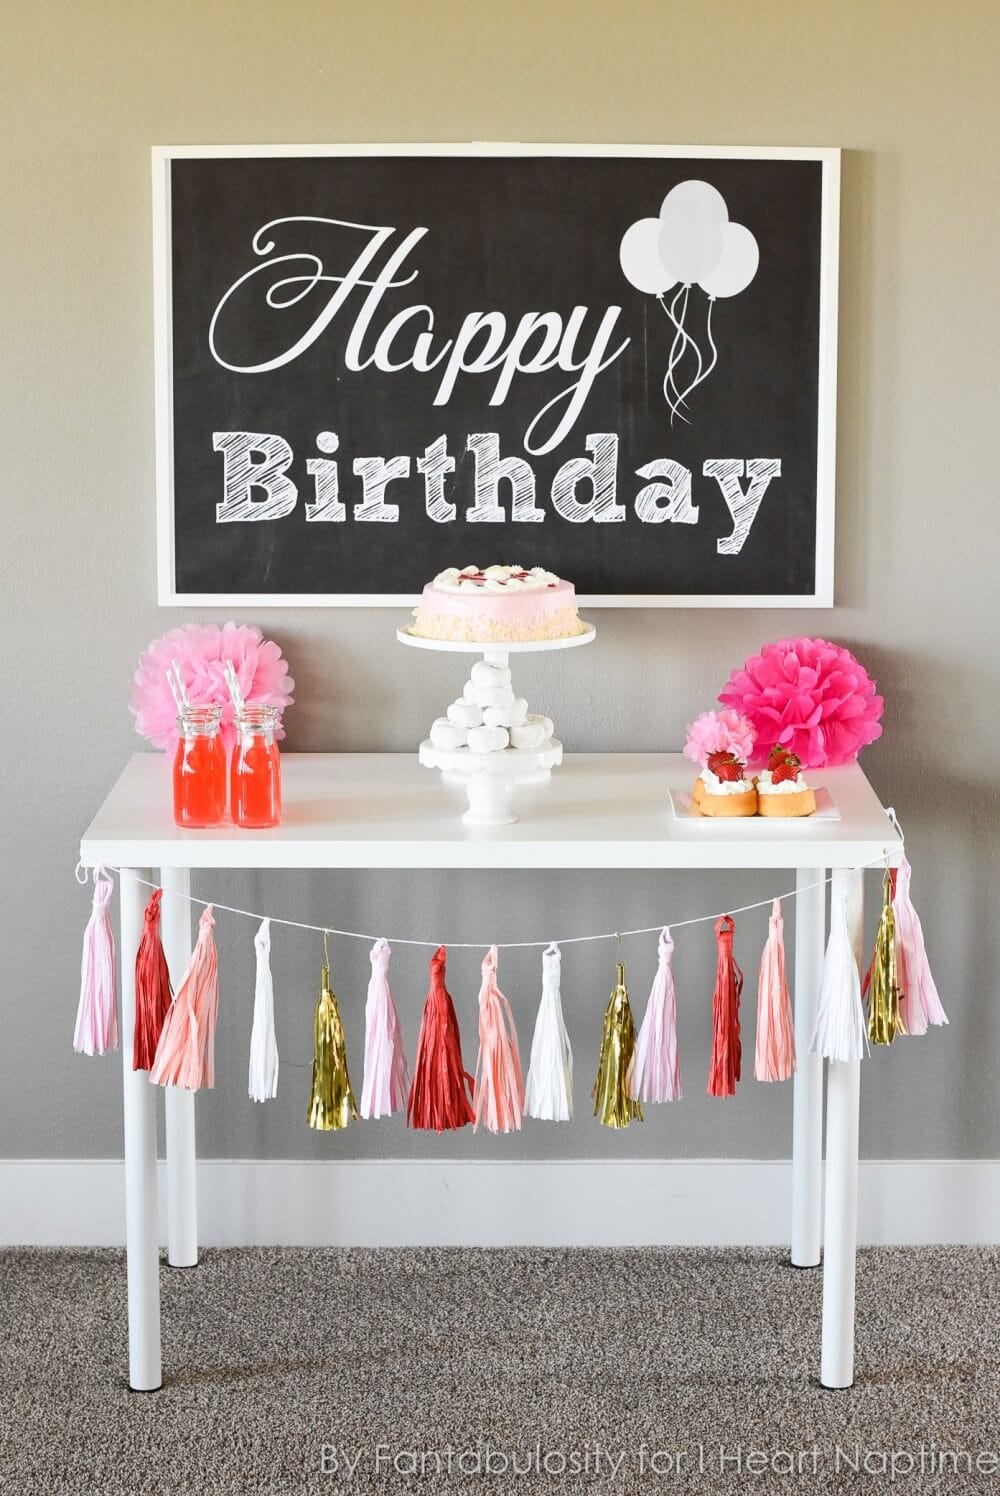 Free Happy Birthday Backdrop - Quickly decorate your dessert table for a birthday party, by simply adding this "Happy Birthday" printable to your display!